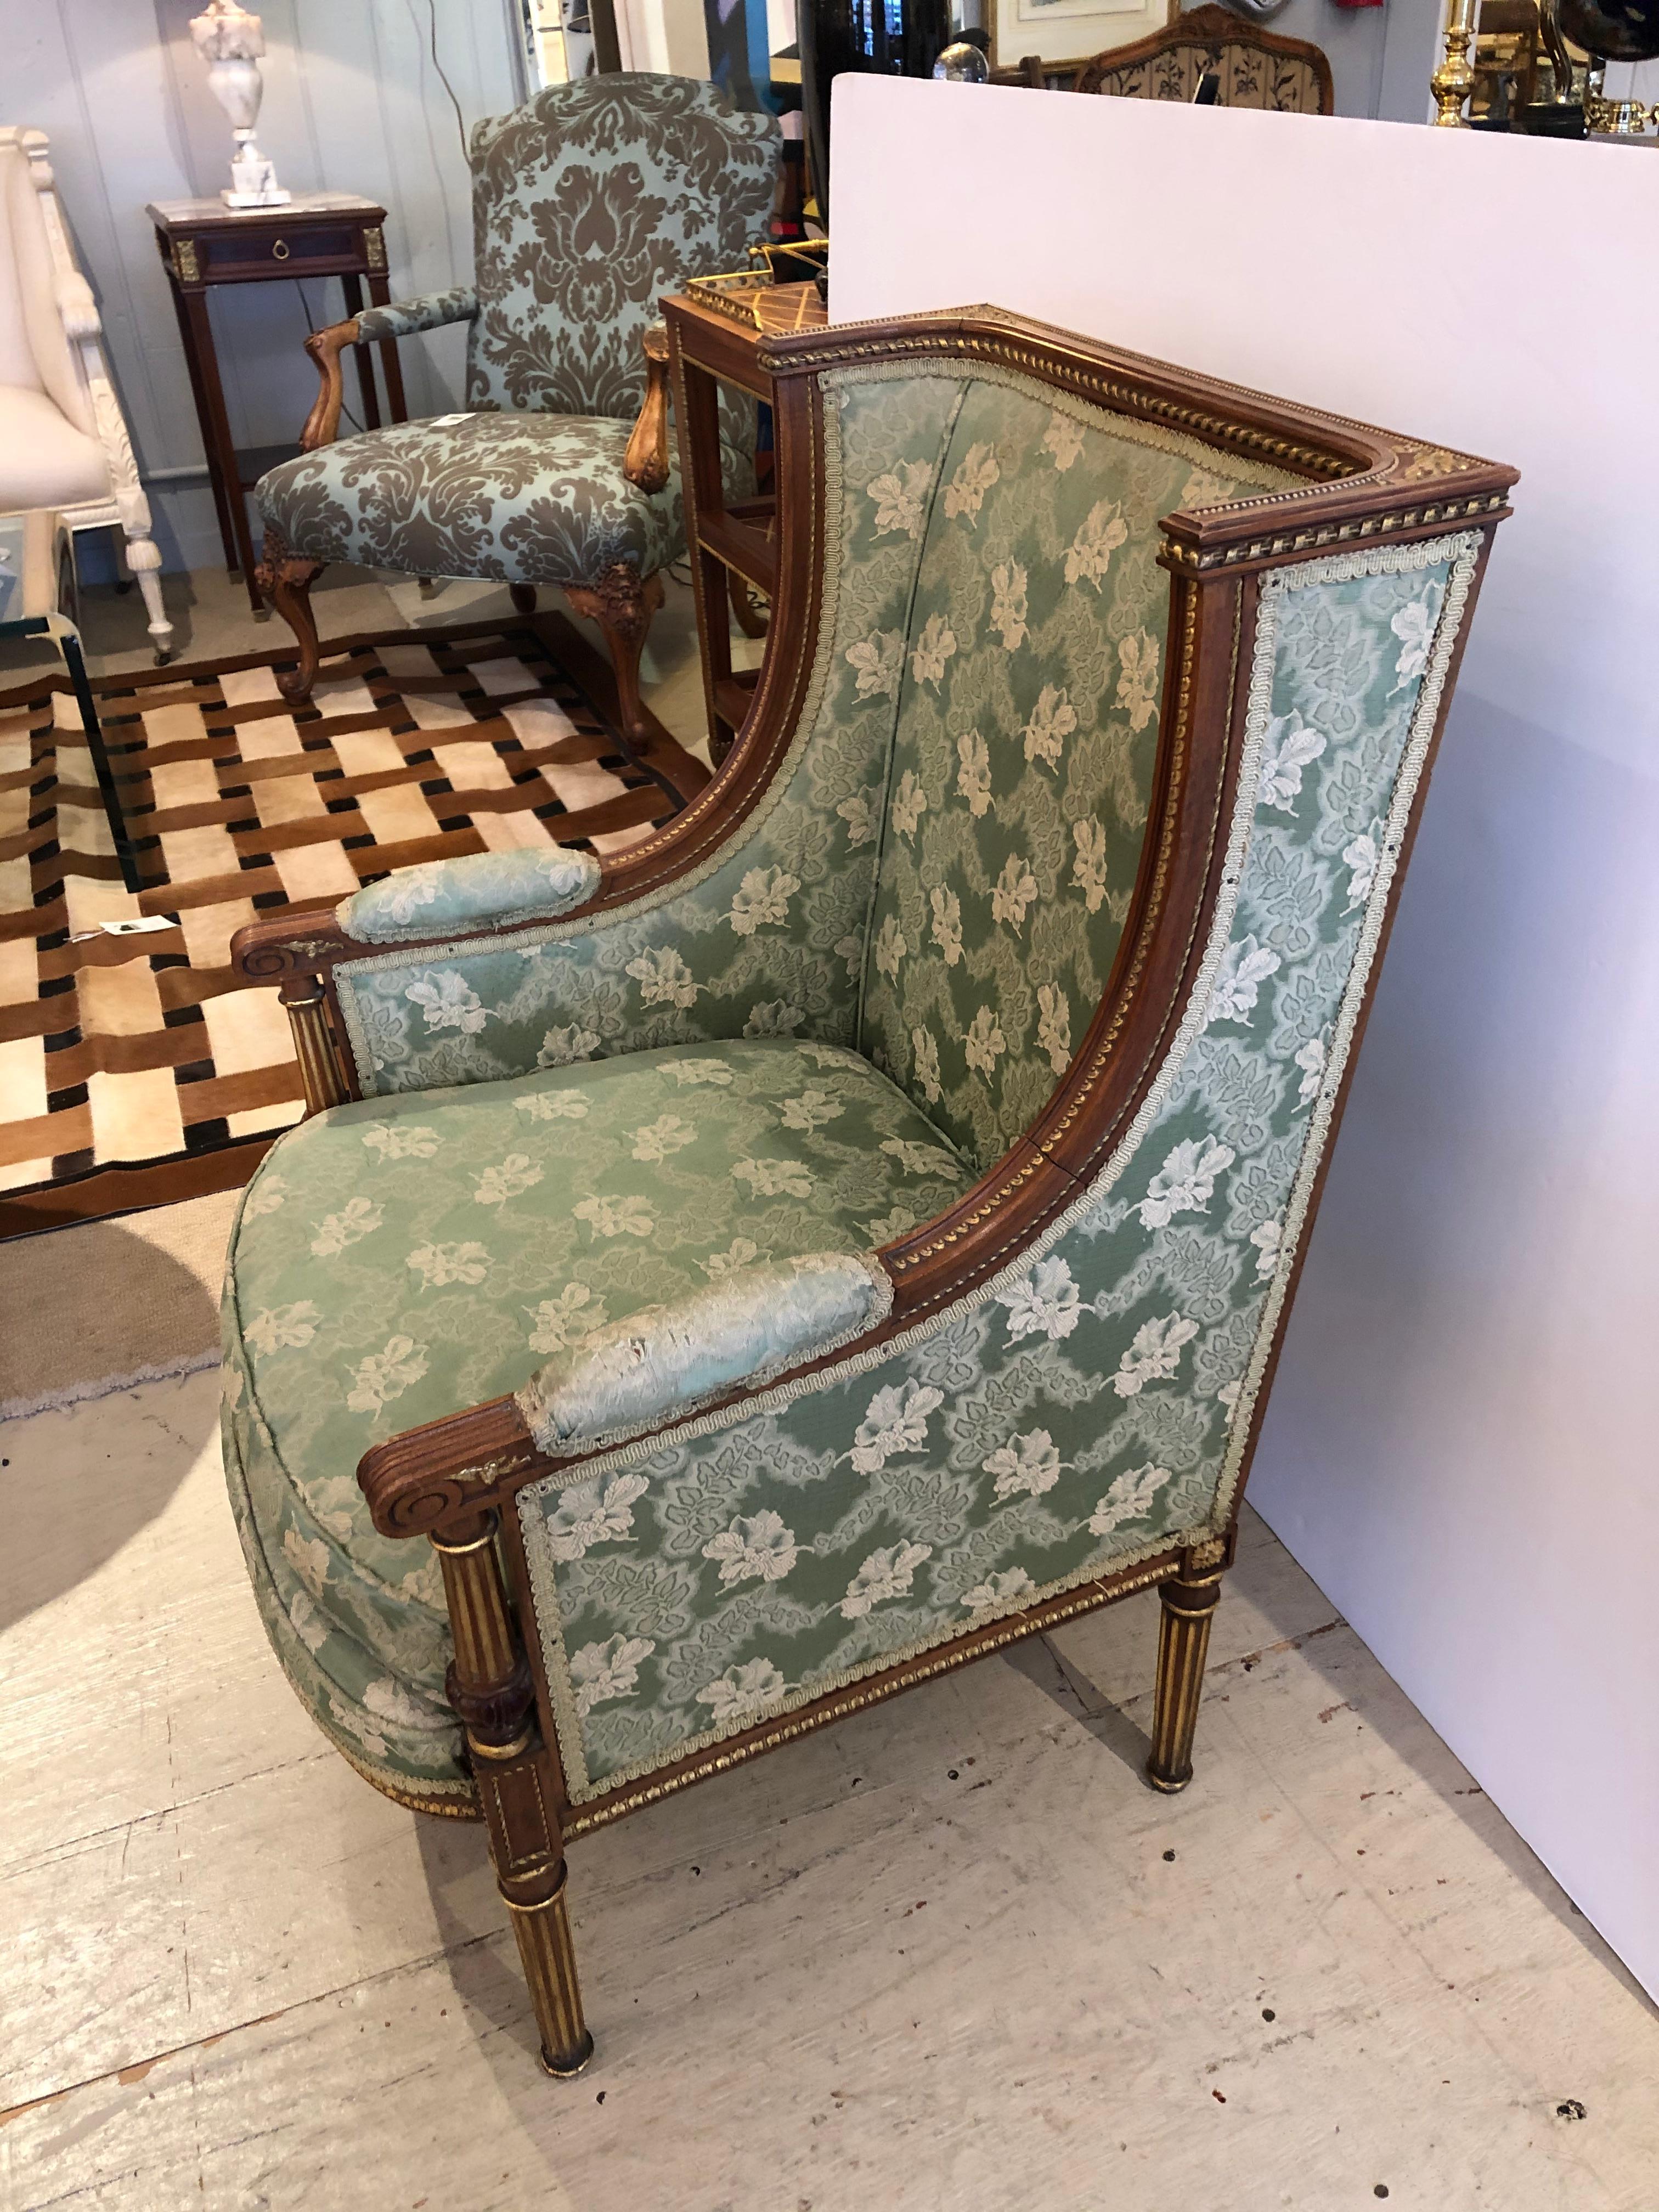 An utterly sublime French Louis XVI style bergère sized for a princess having gilded carved walnut frame with magnificent detailing, reeded legs, and original green satin brocade. Upholstery shows some wear especially on the arm pads.
Measures: Arm